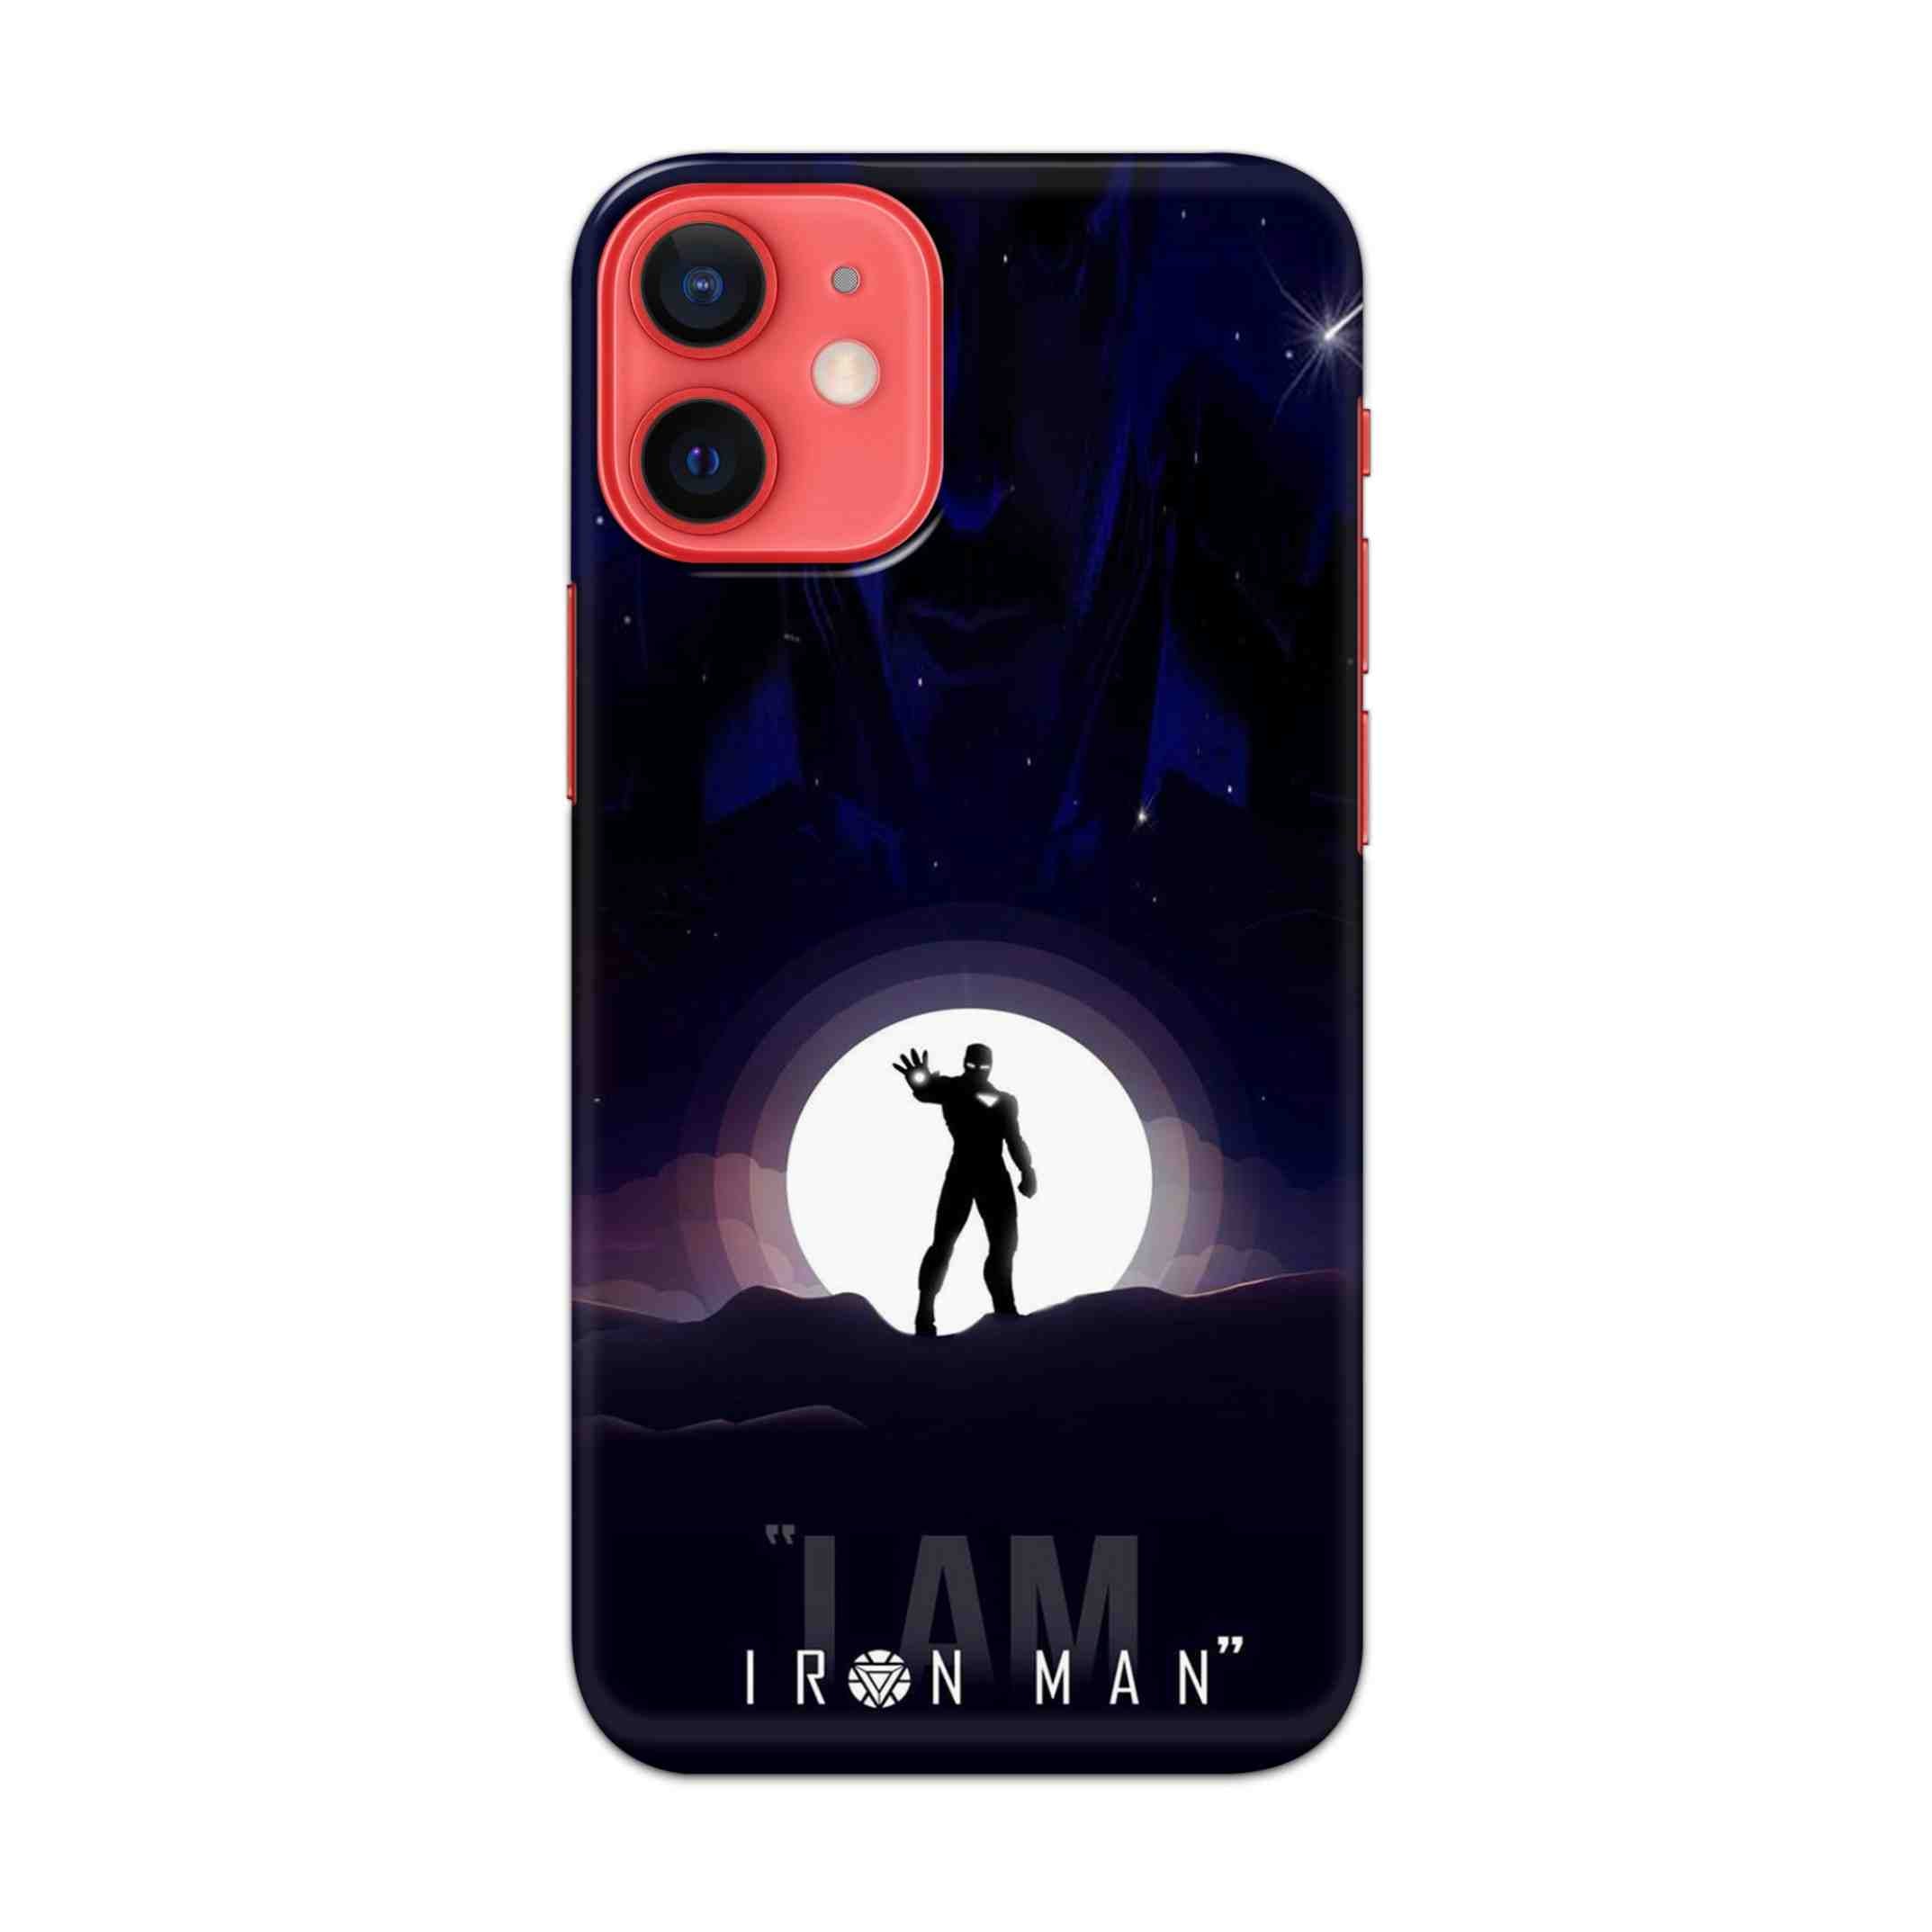 Buy I Am Iron Man Hard Back Mobile Phone Case/Cover For Apple iPhone 12 mini Online